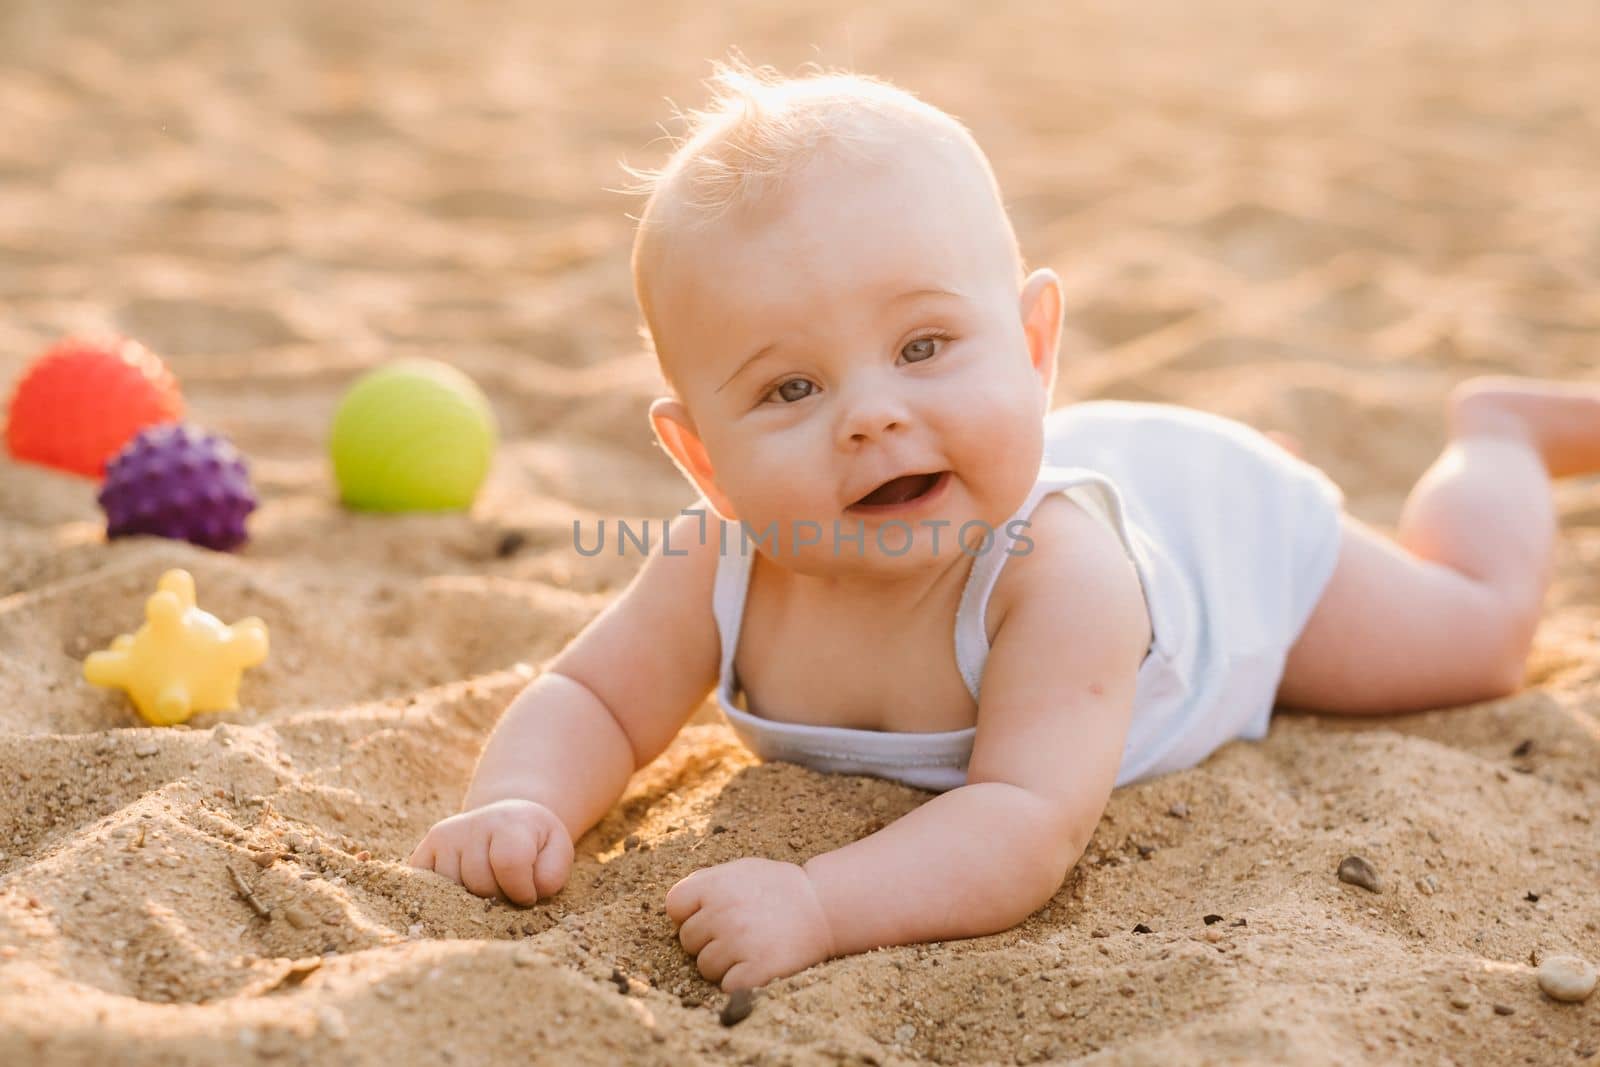 A happy little boy is lying on a sandy beach near the sea in the rays of the setting sun.